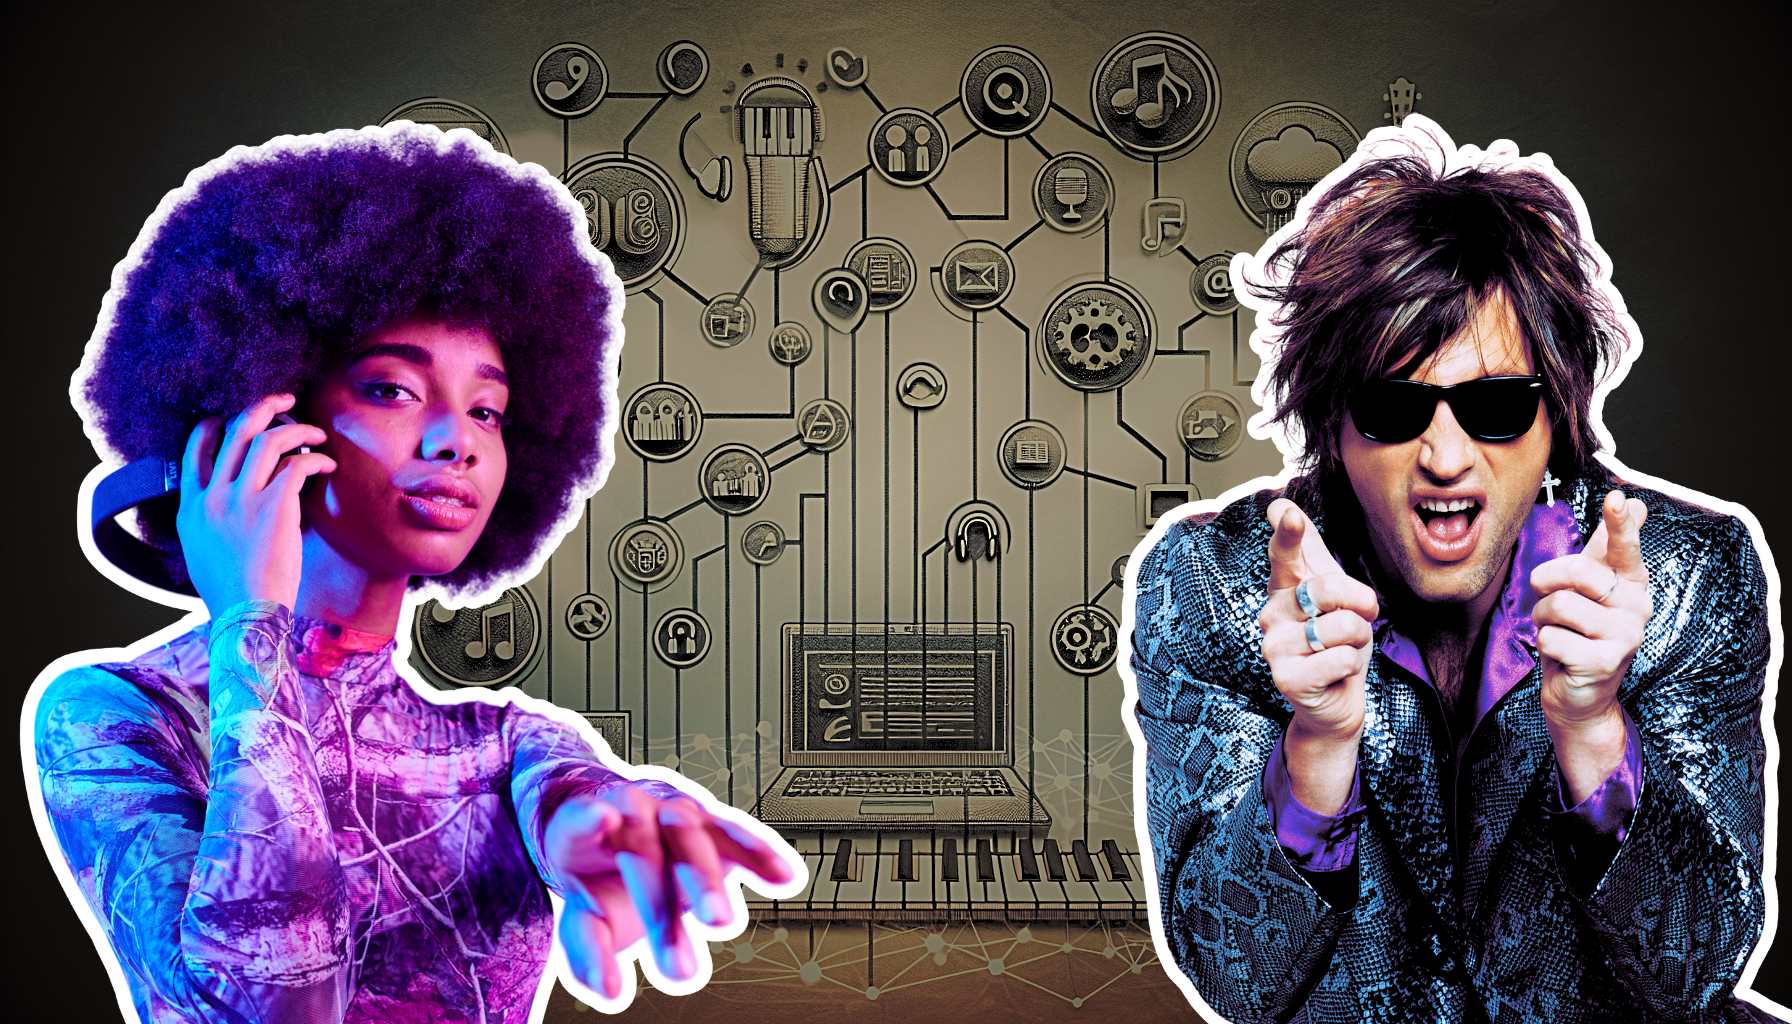 rnb singer and glam rocker point at you as a complex music networking layout is in the background